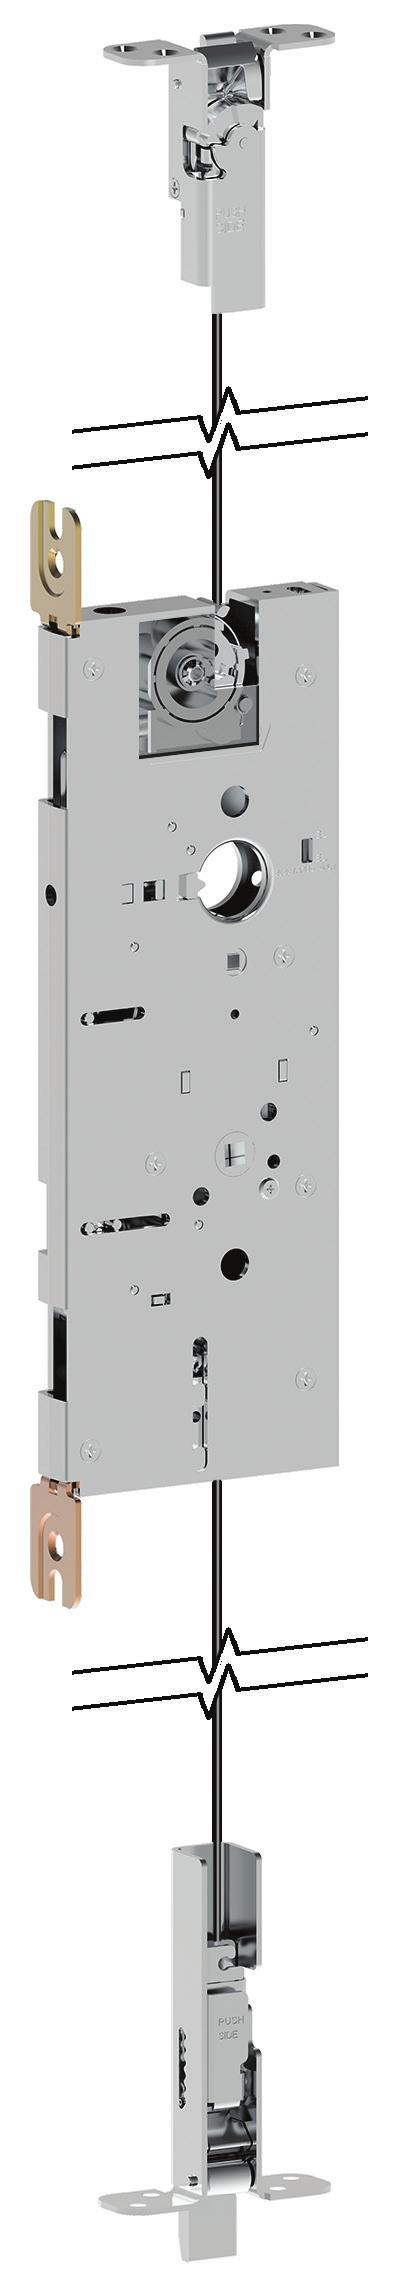 Schlage LM9200 The Schlage LM9200 is intended for lever x lever applications where levers are on both the inside and outside of the door.